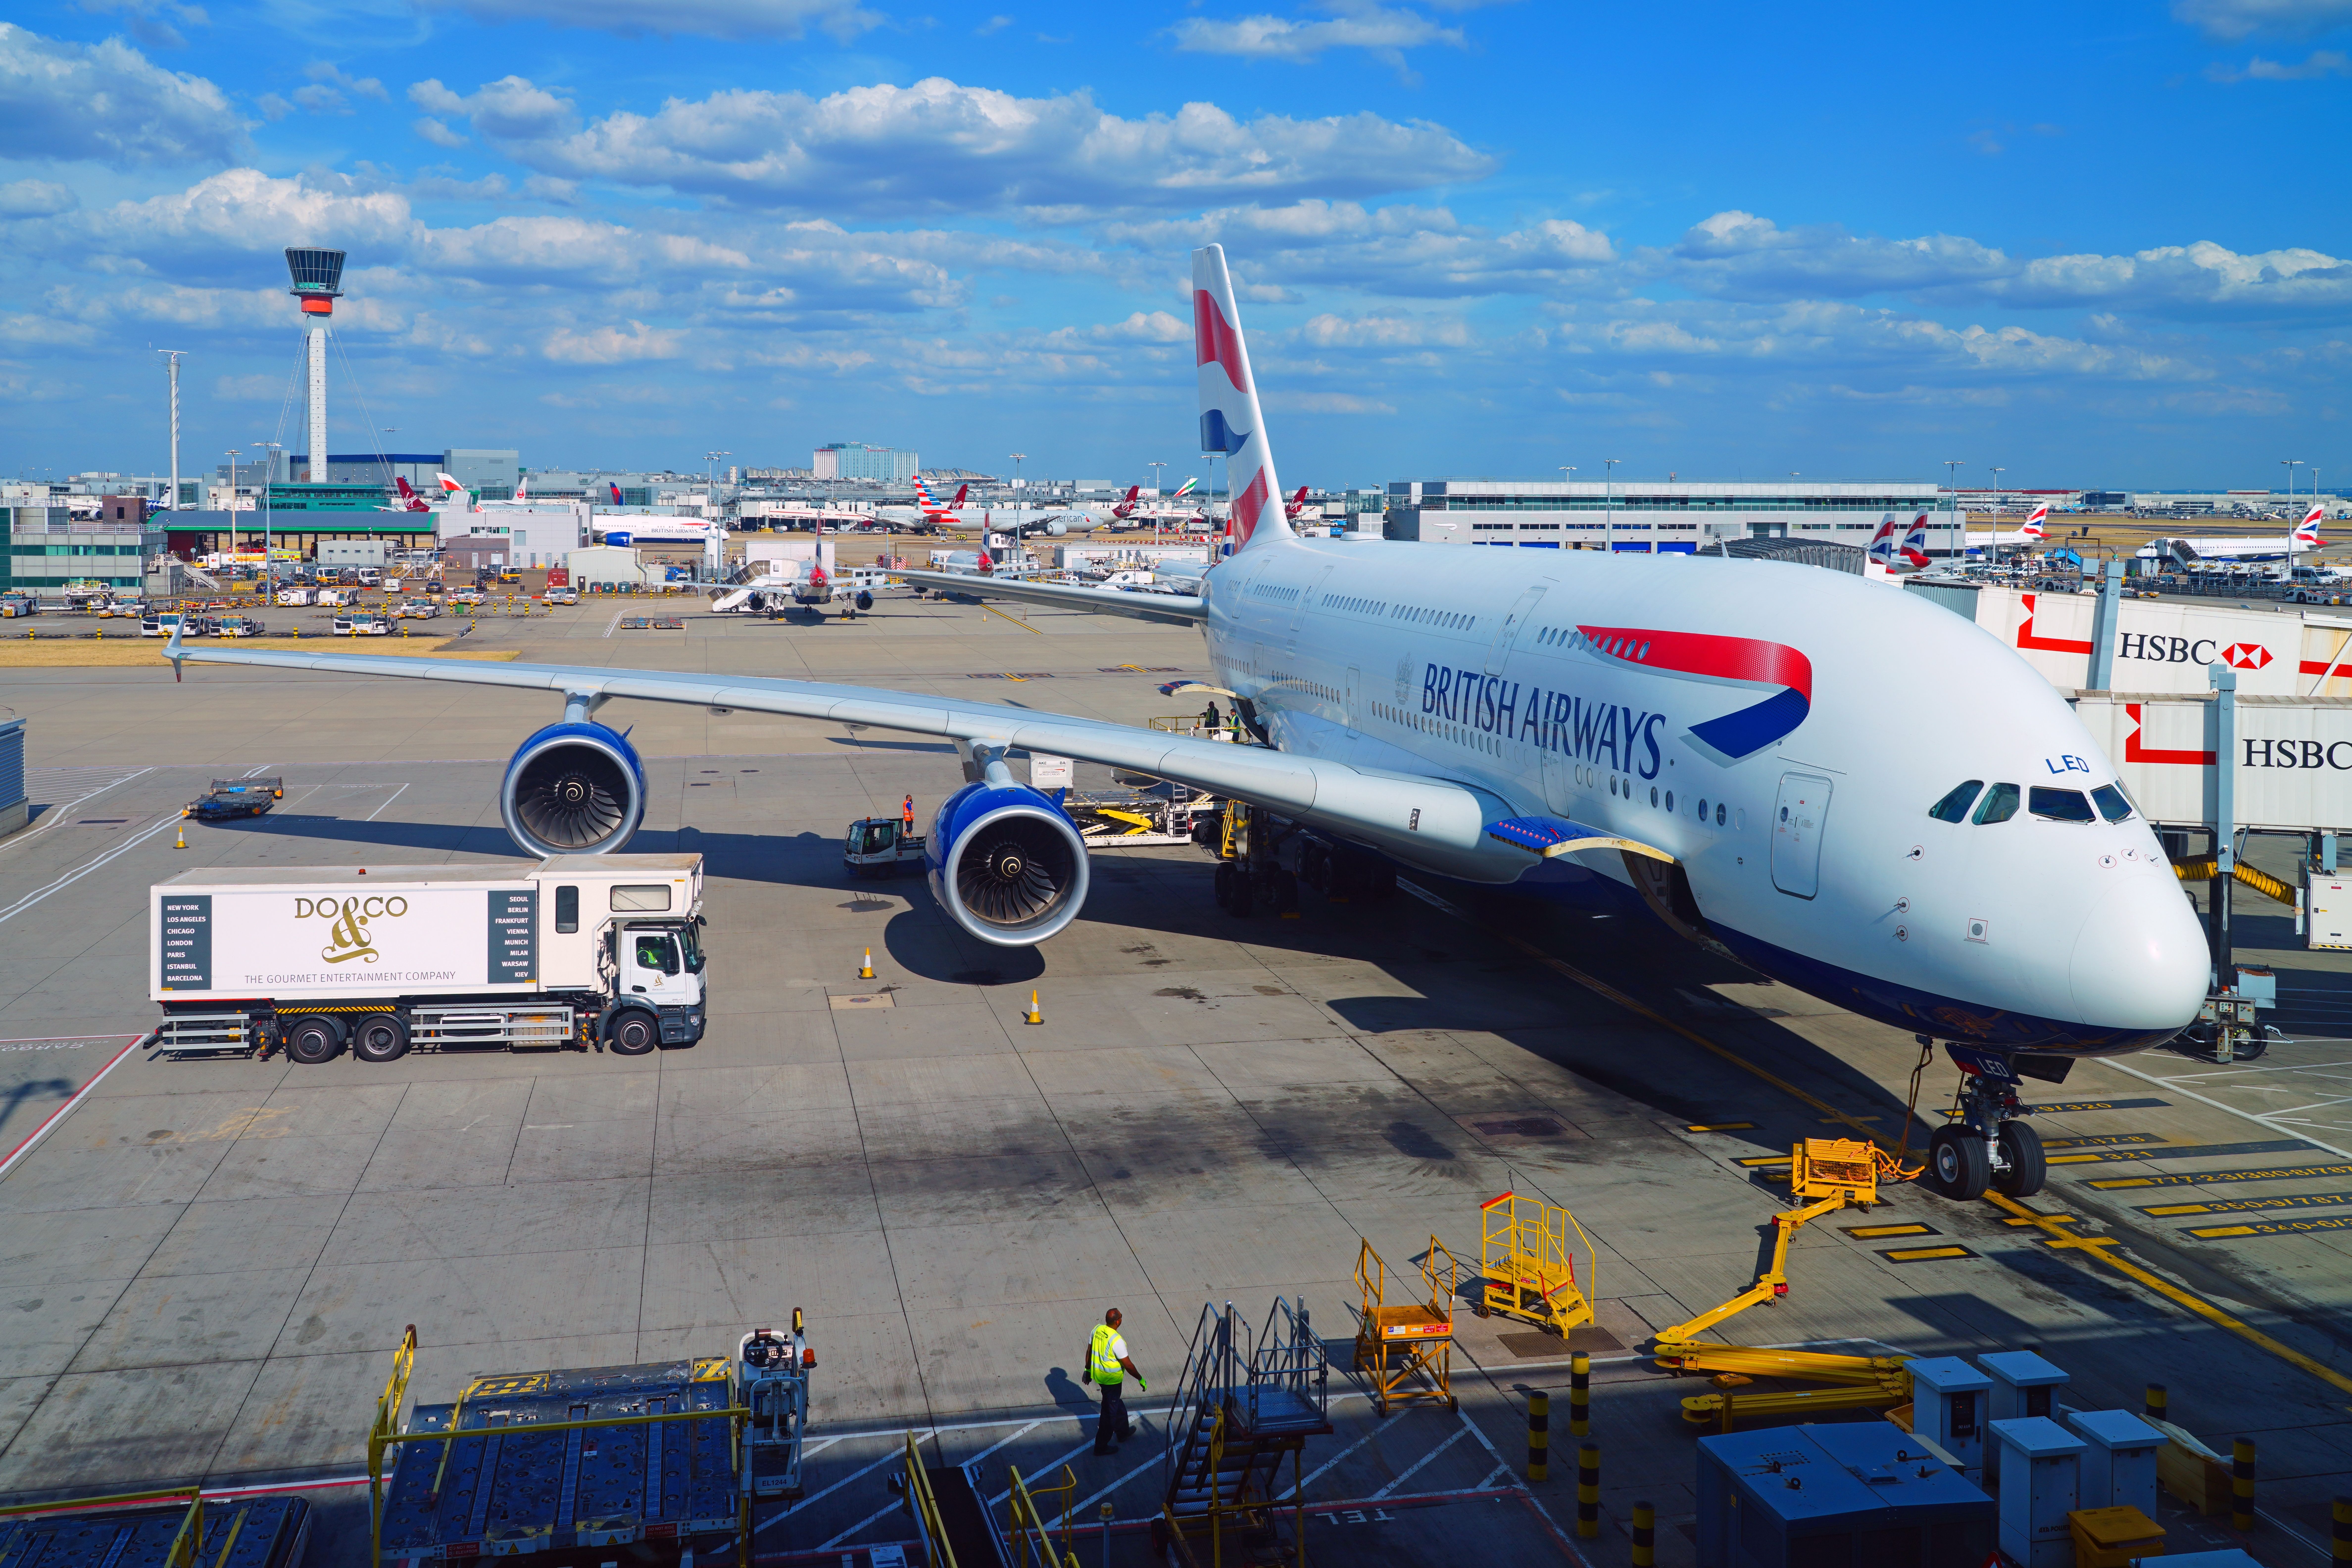 A British Airways Airbus A380 parked at the gate.